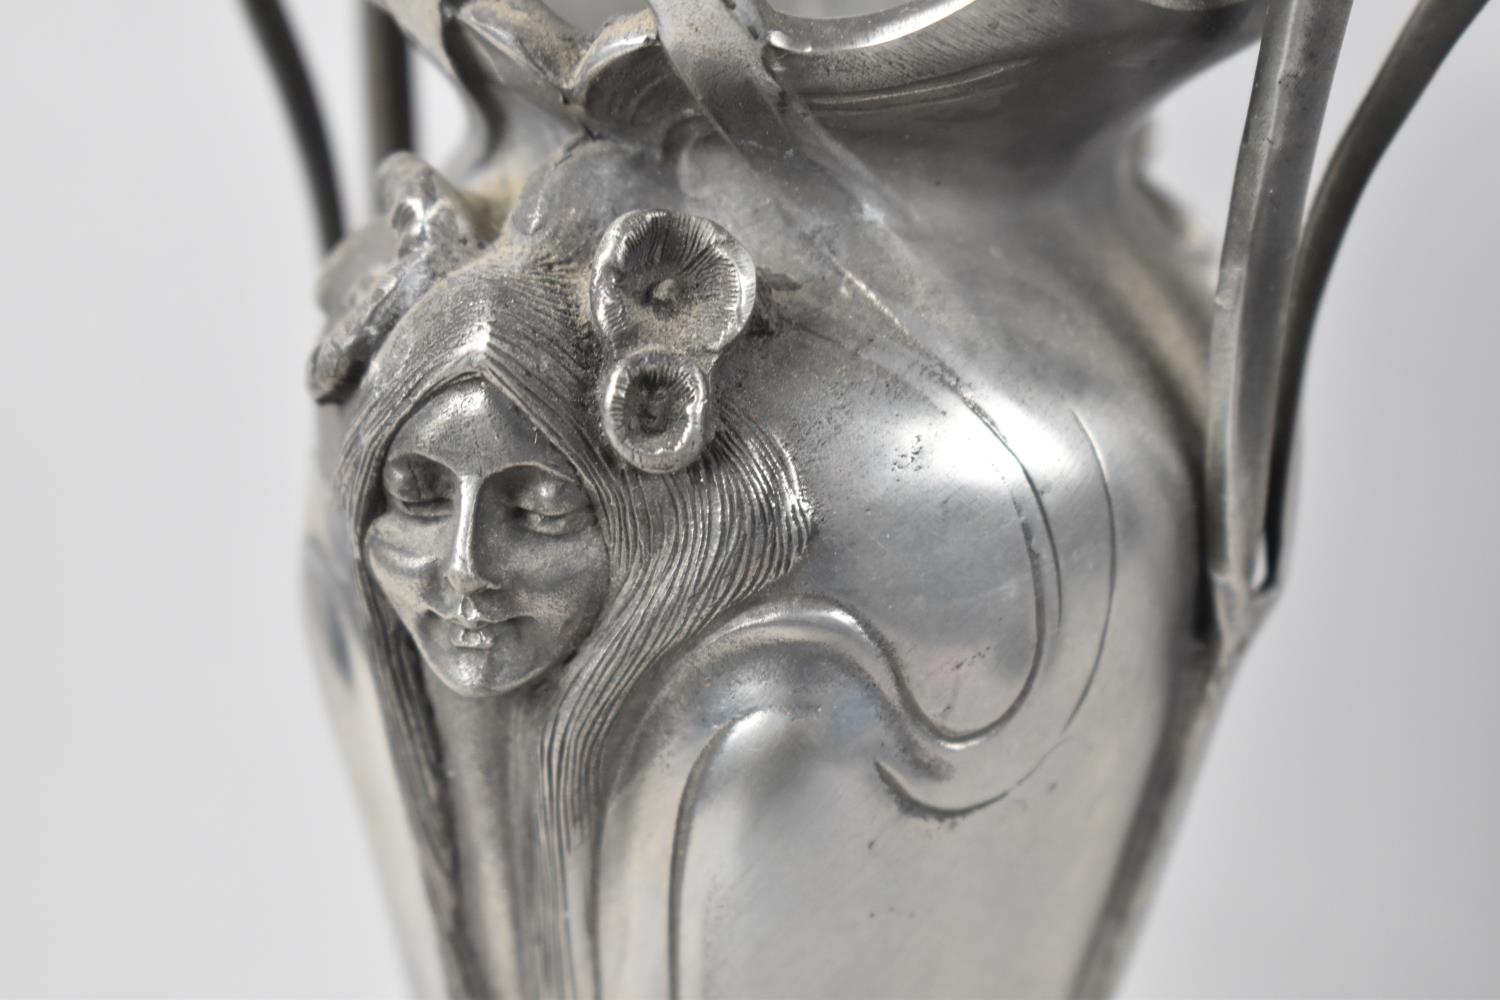 An Art Nouveau Cast Pewter Vase with Maiden Mask Decoration to Either Side by Thomas Williams, - Image 2 of 3